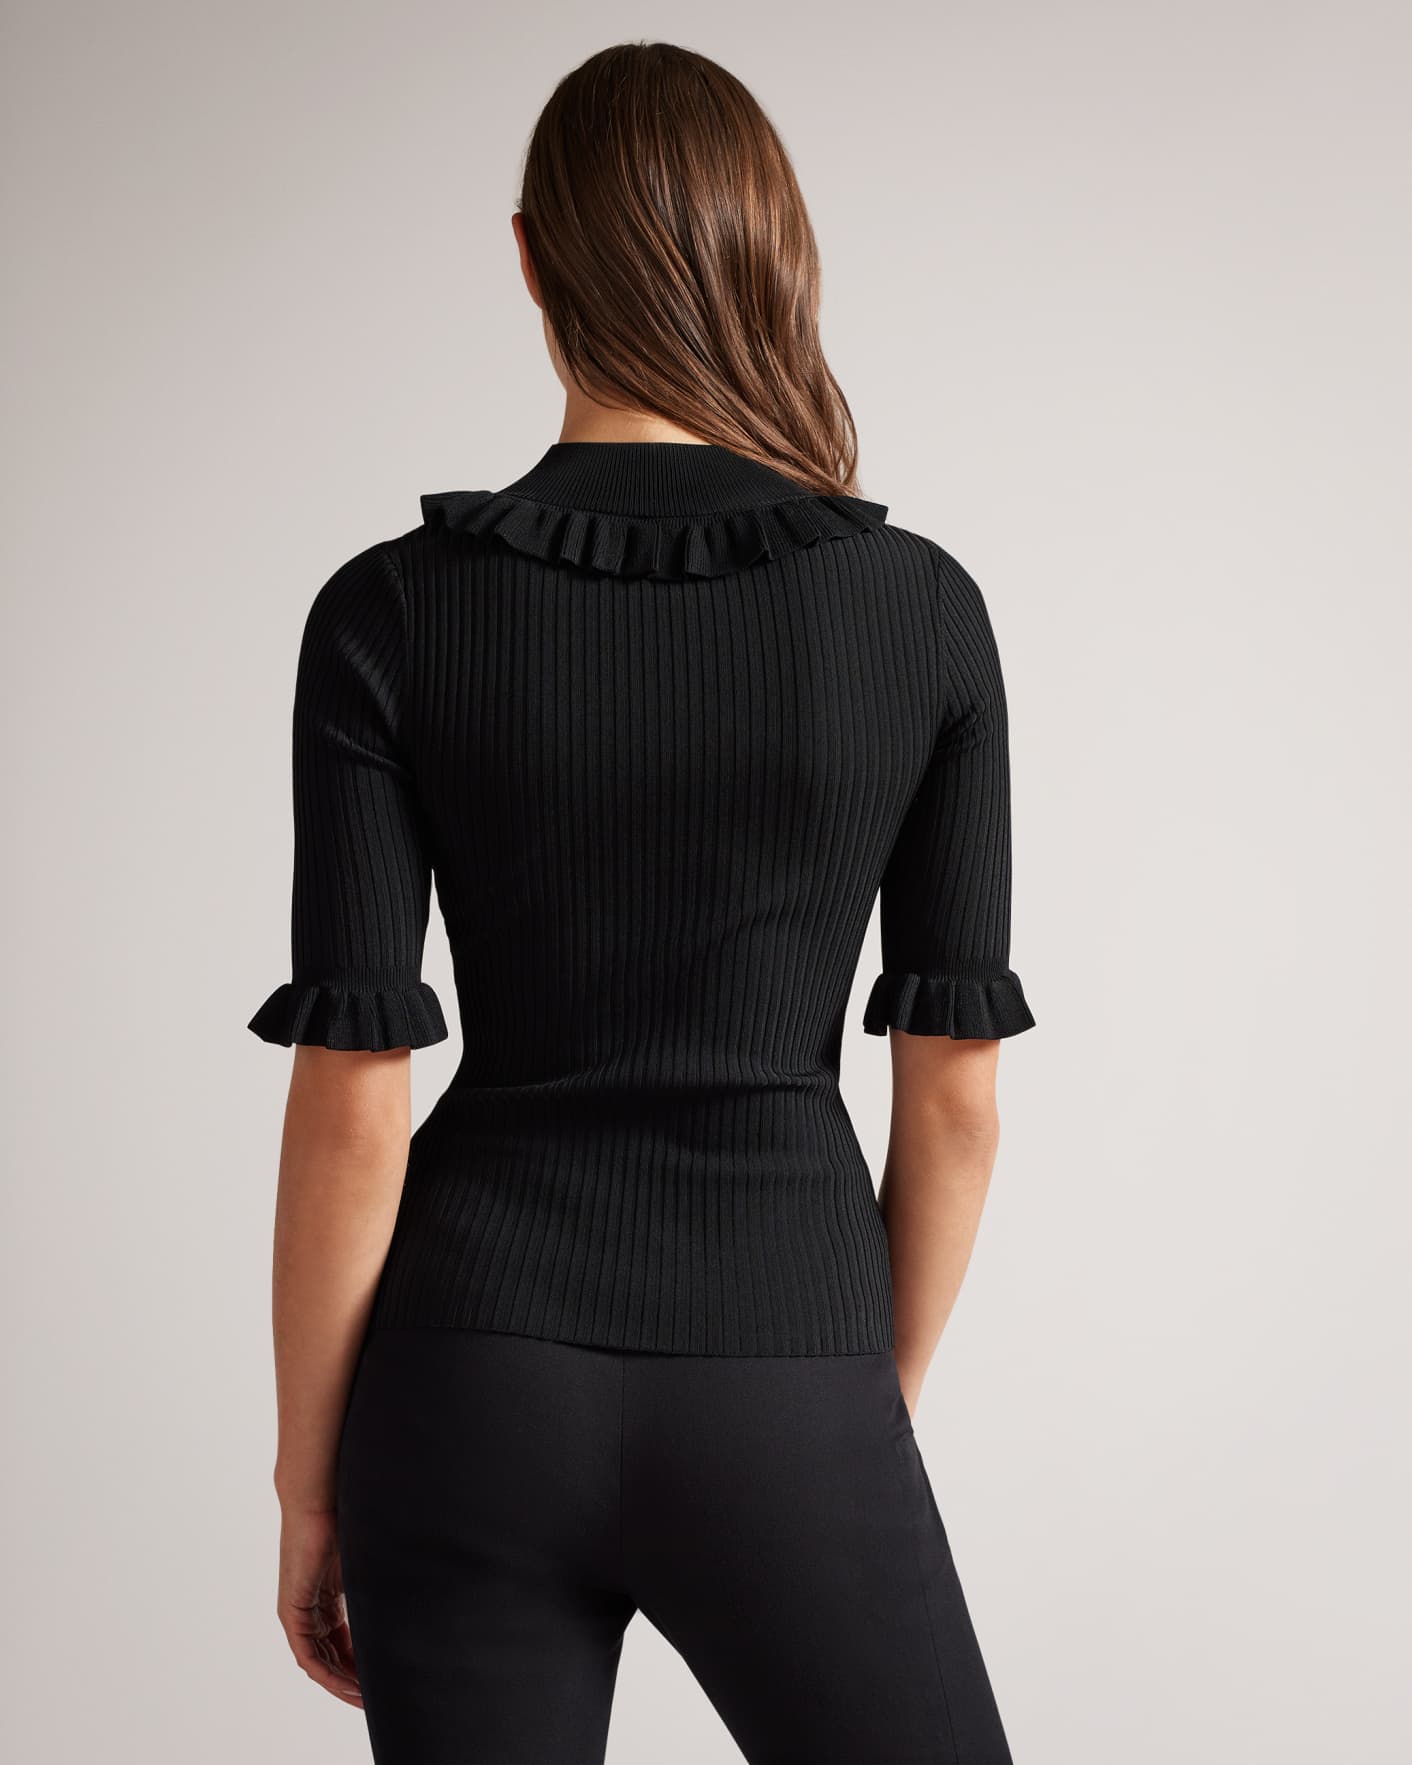 Black Fitted Top With Frill Neck Detail Ted Baker